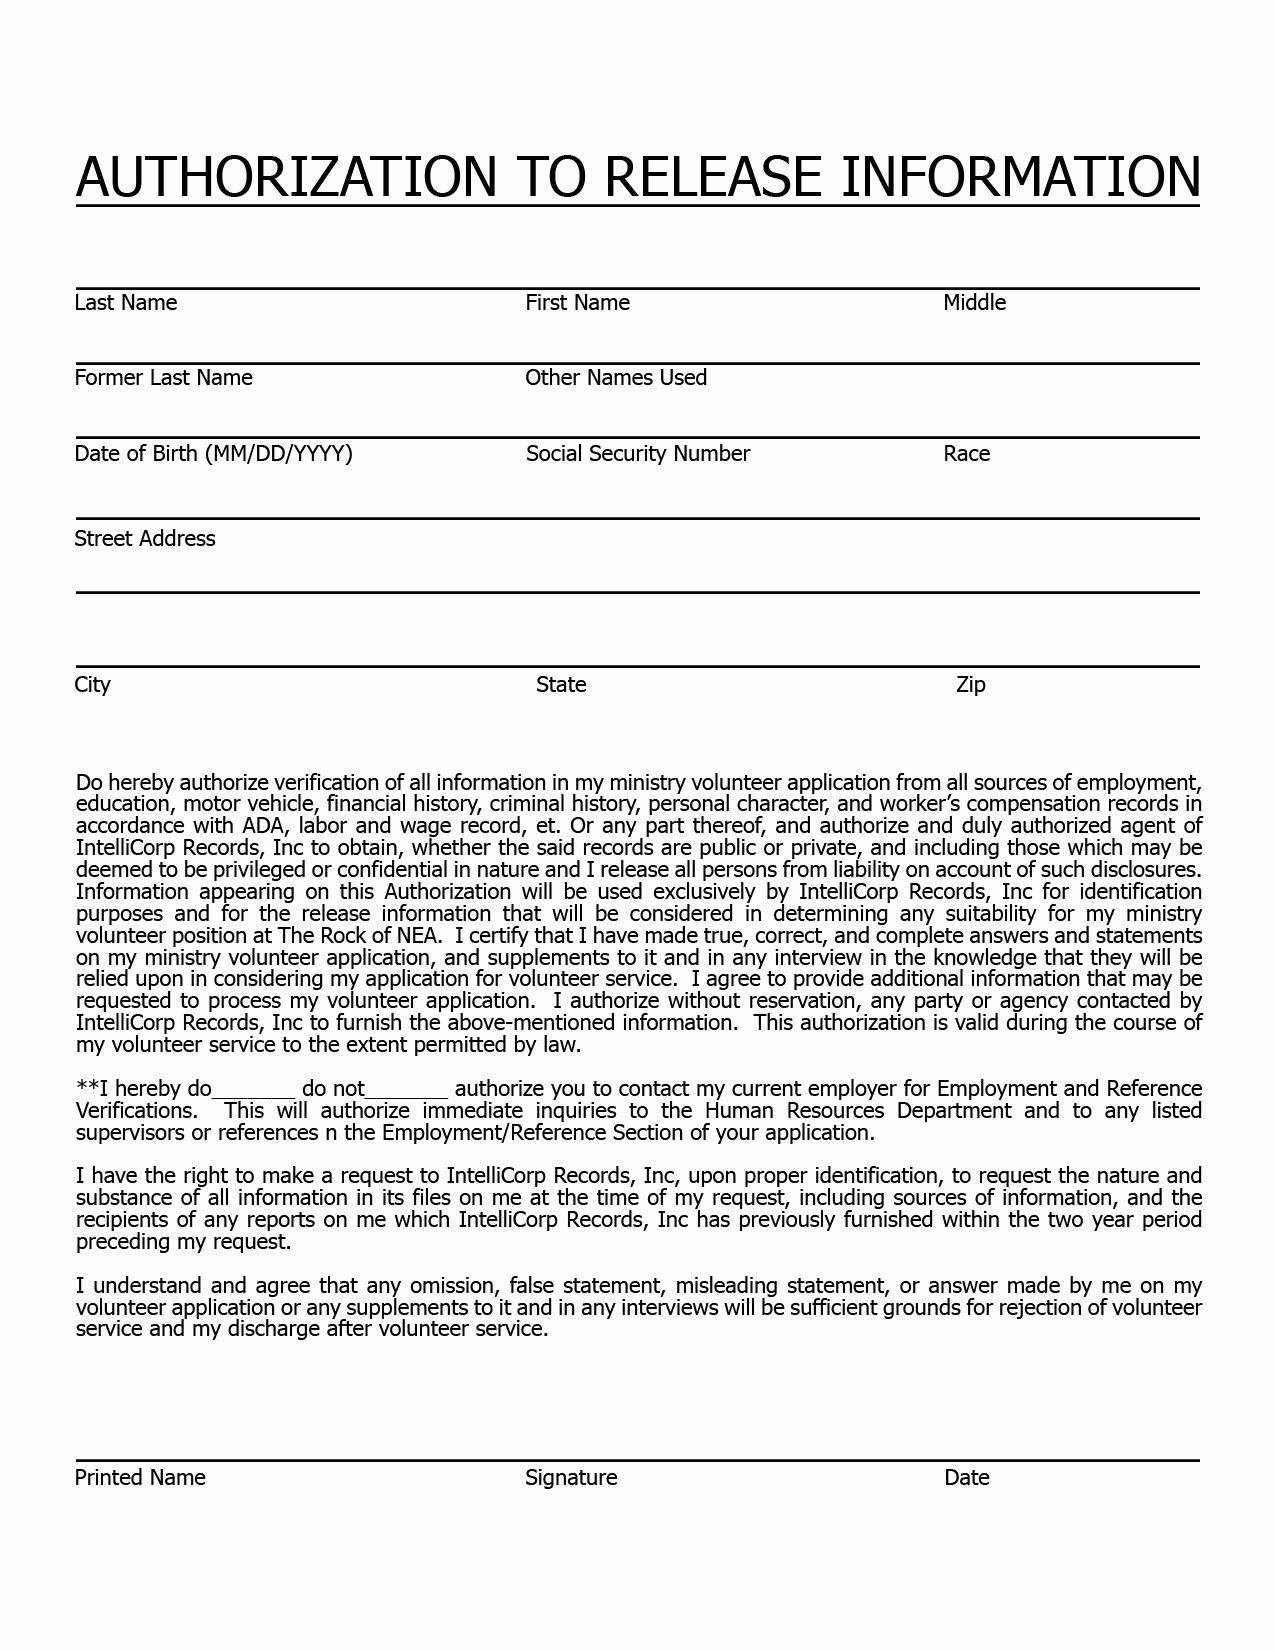 Background Check form Template Free Luxury More Items